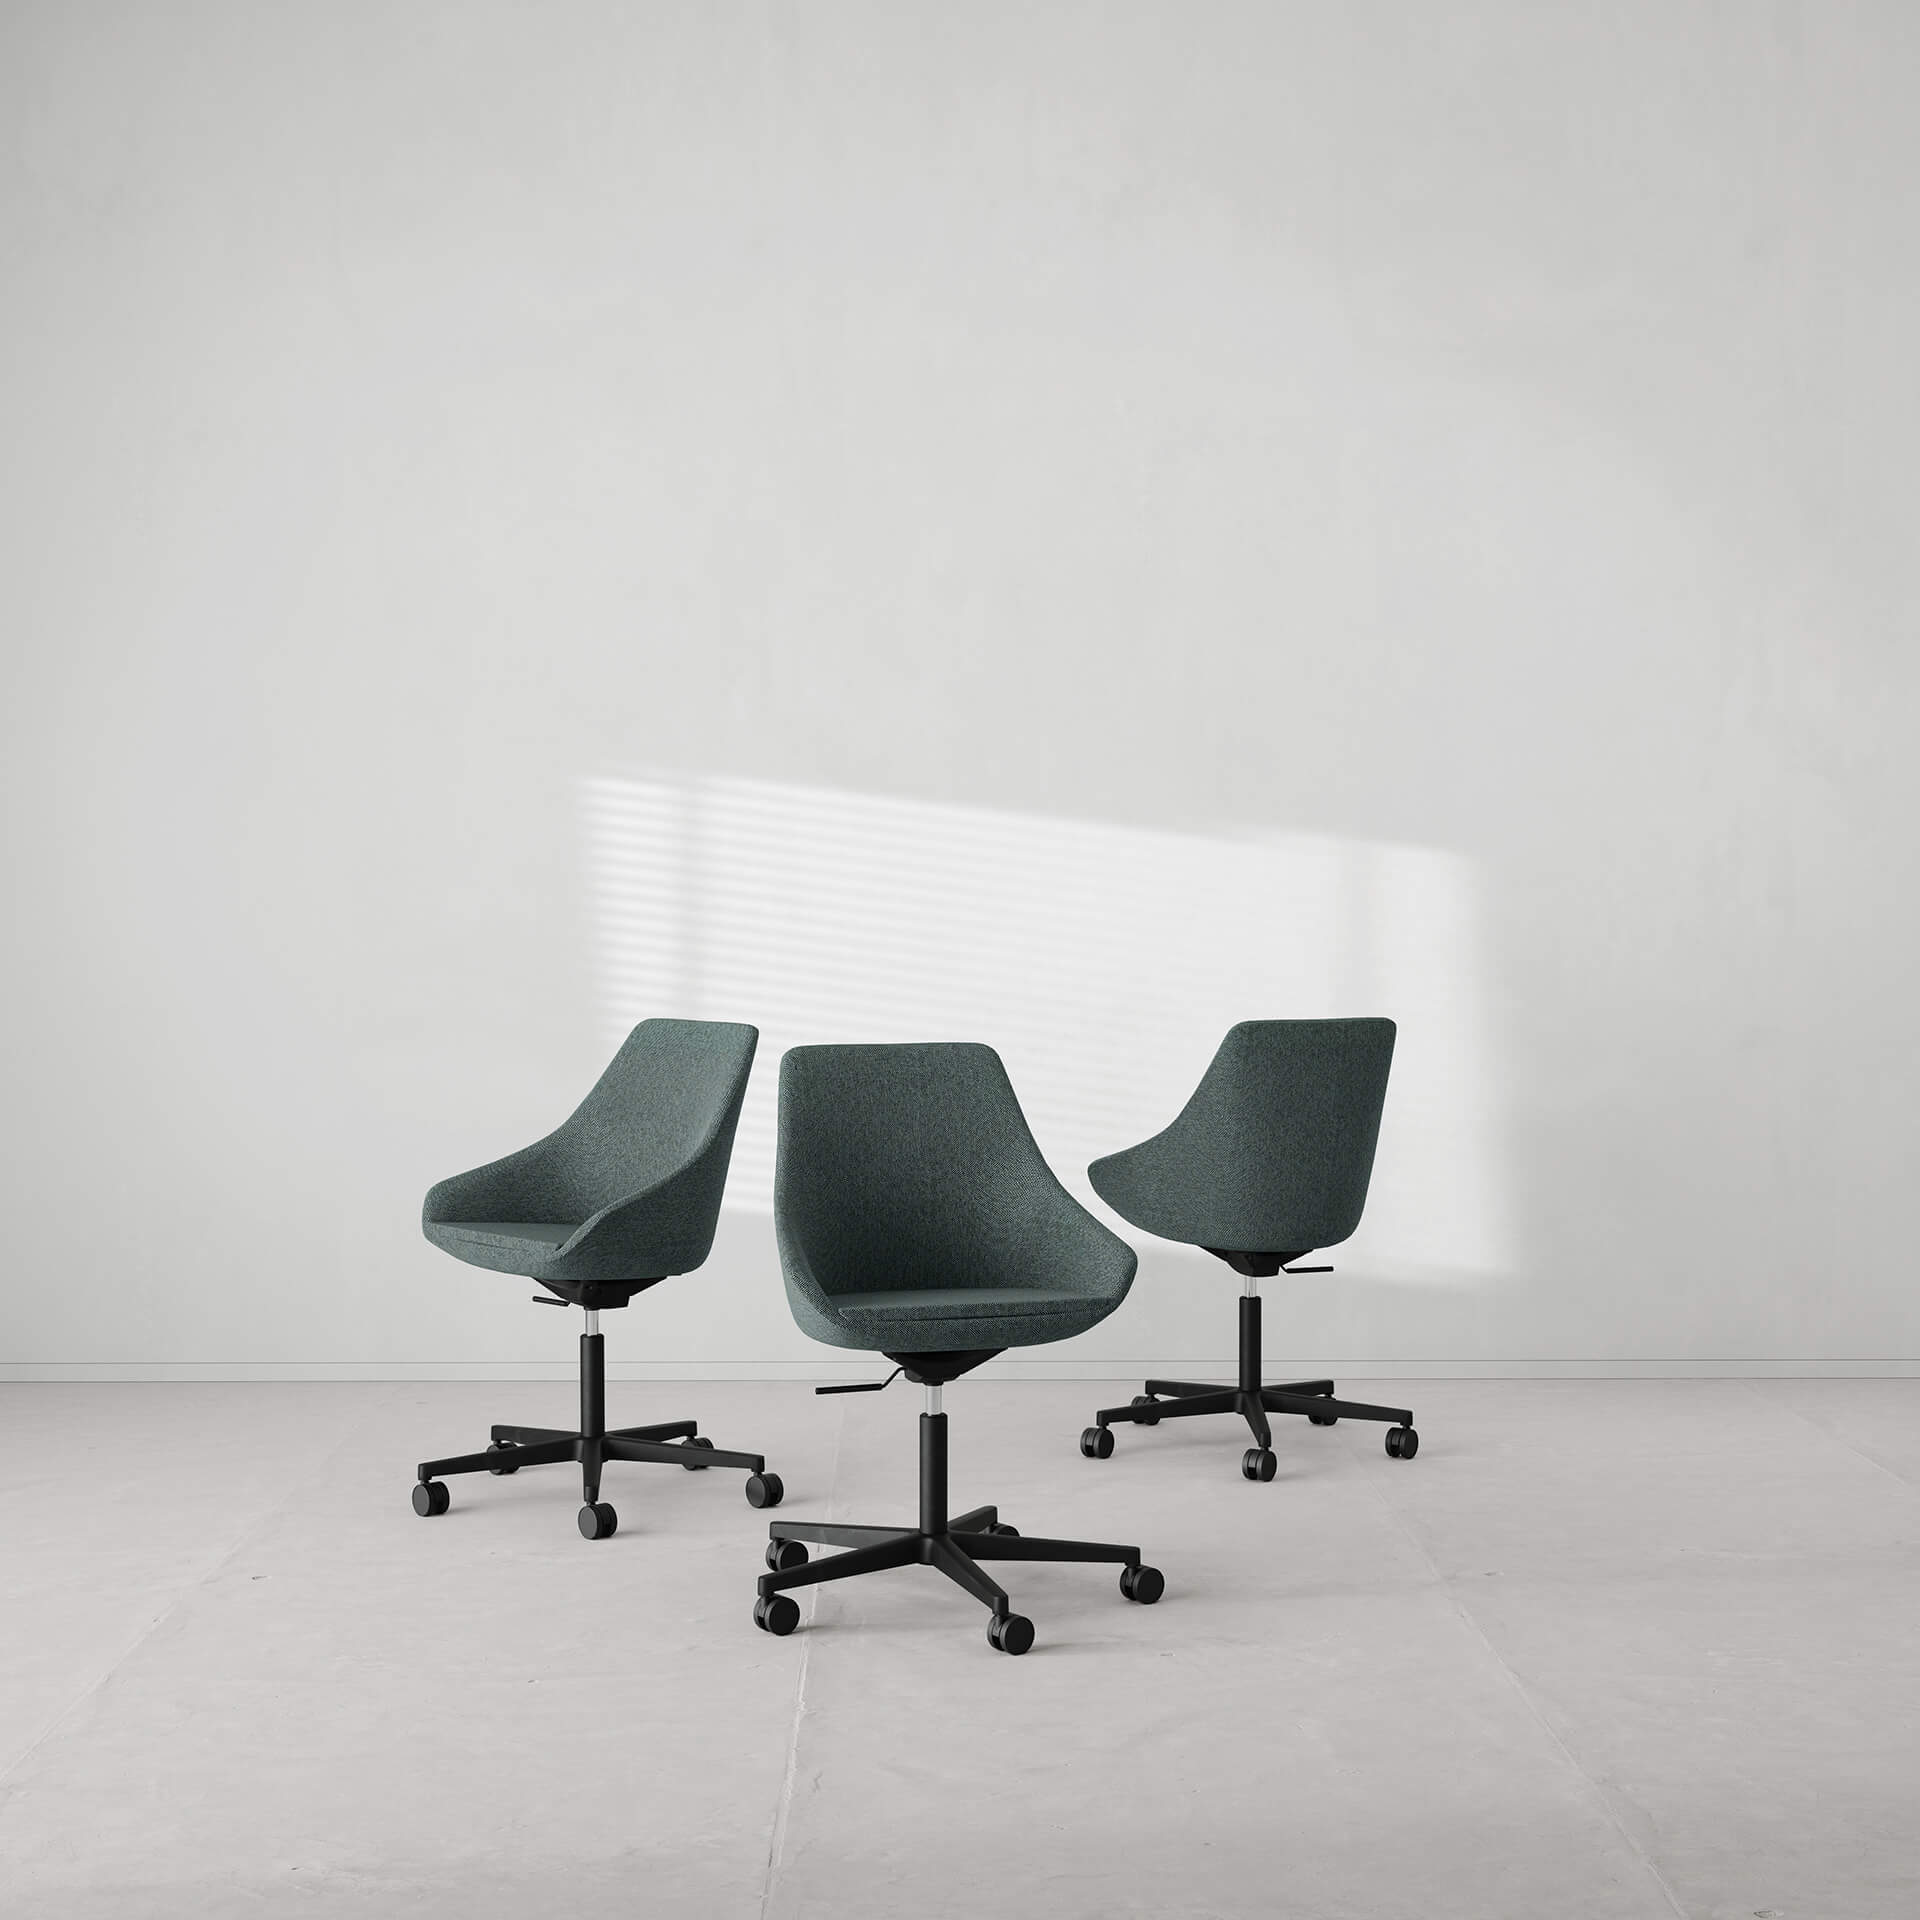 Group Office Chair 3D Render